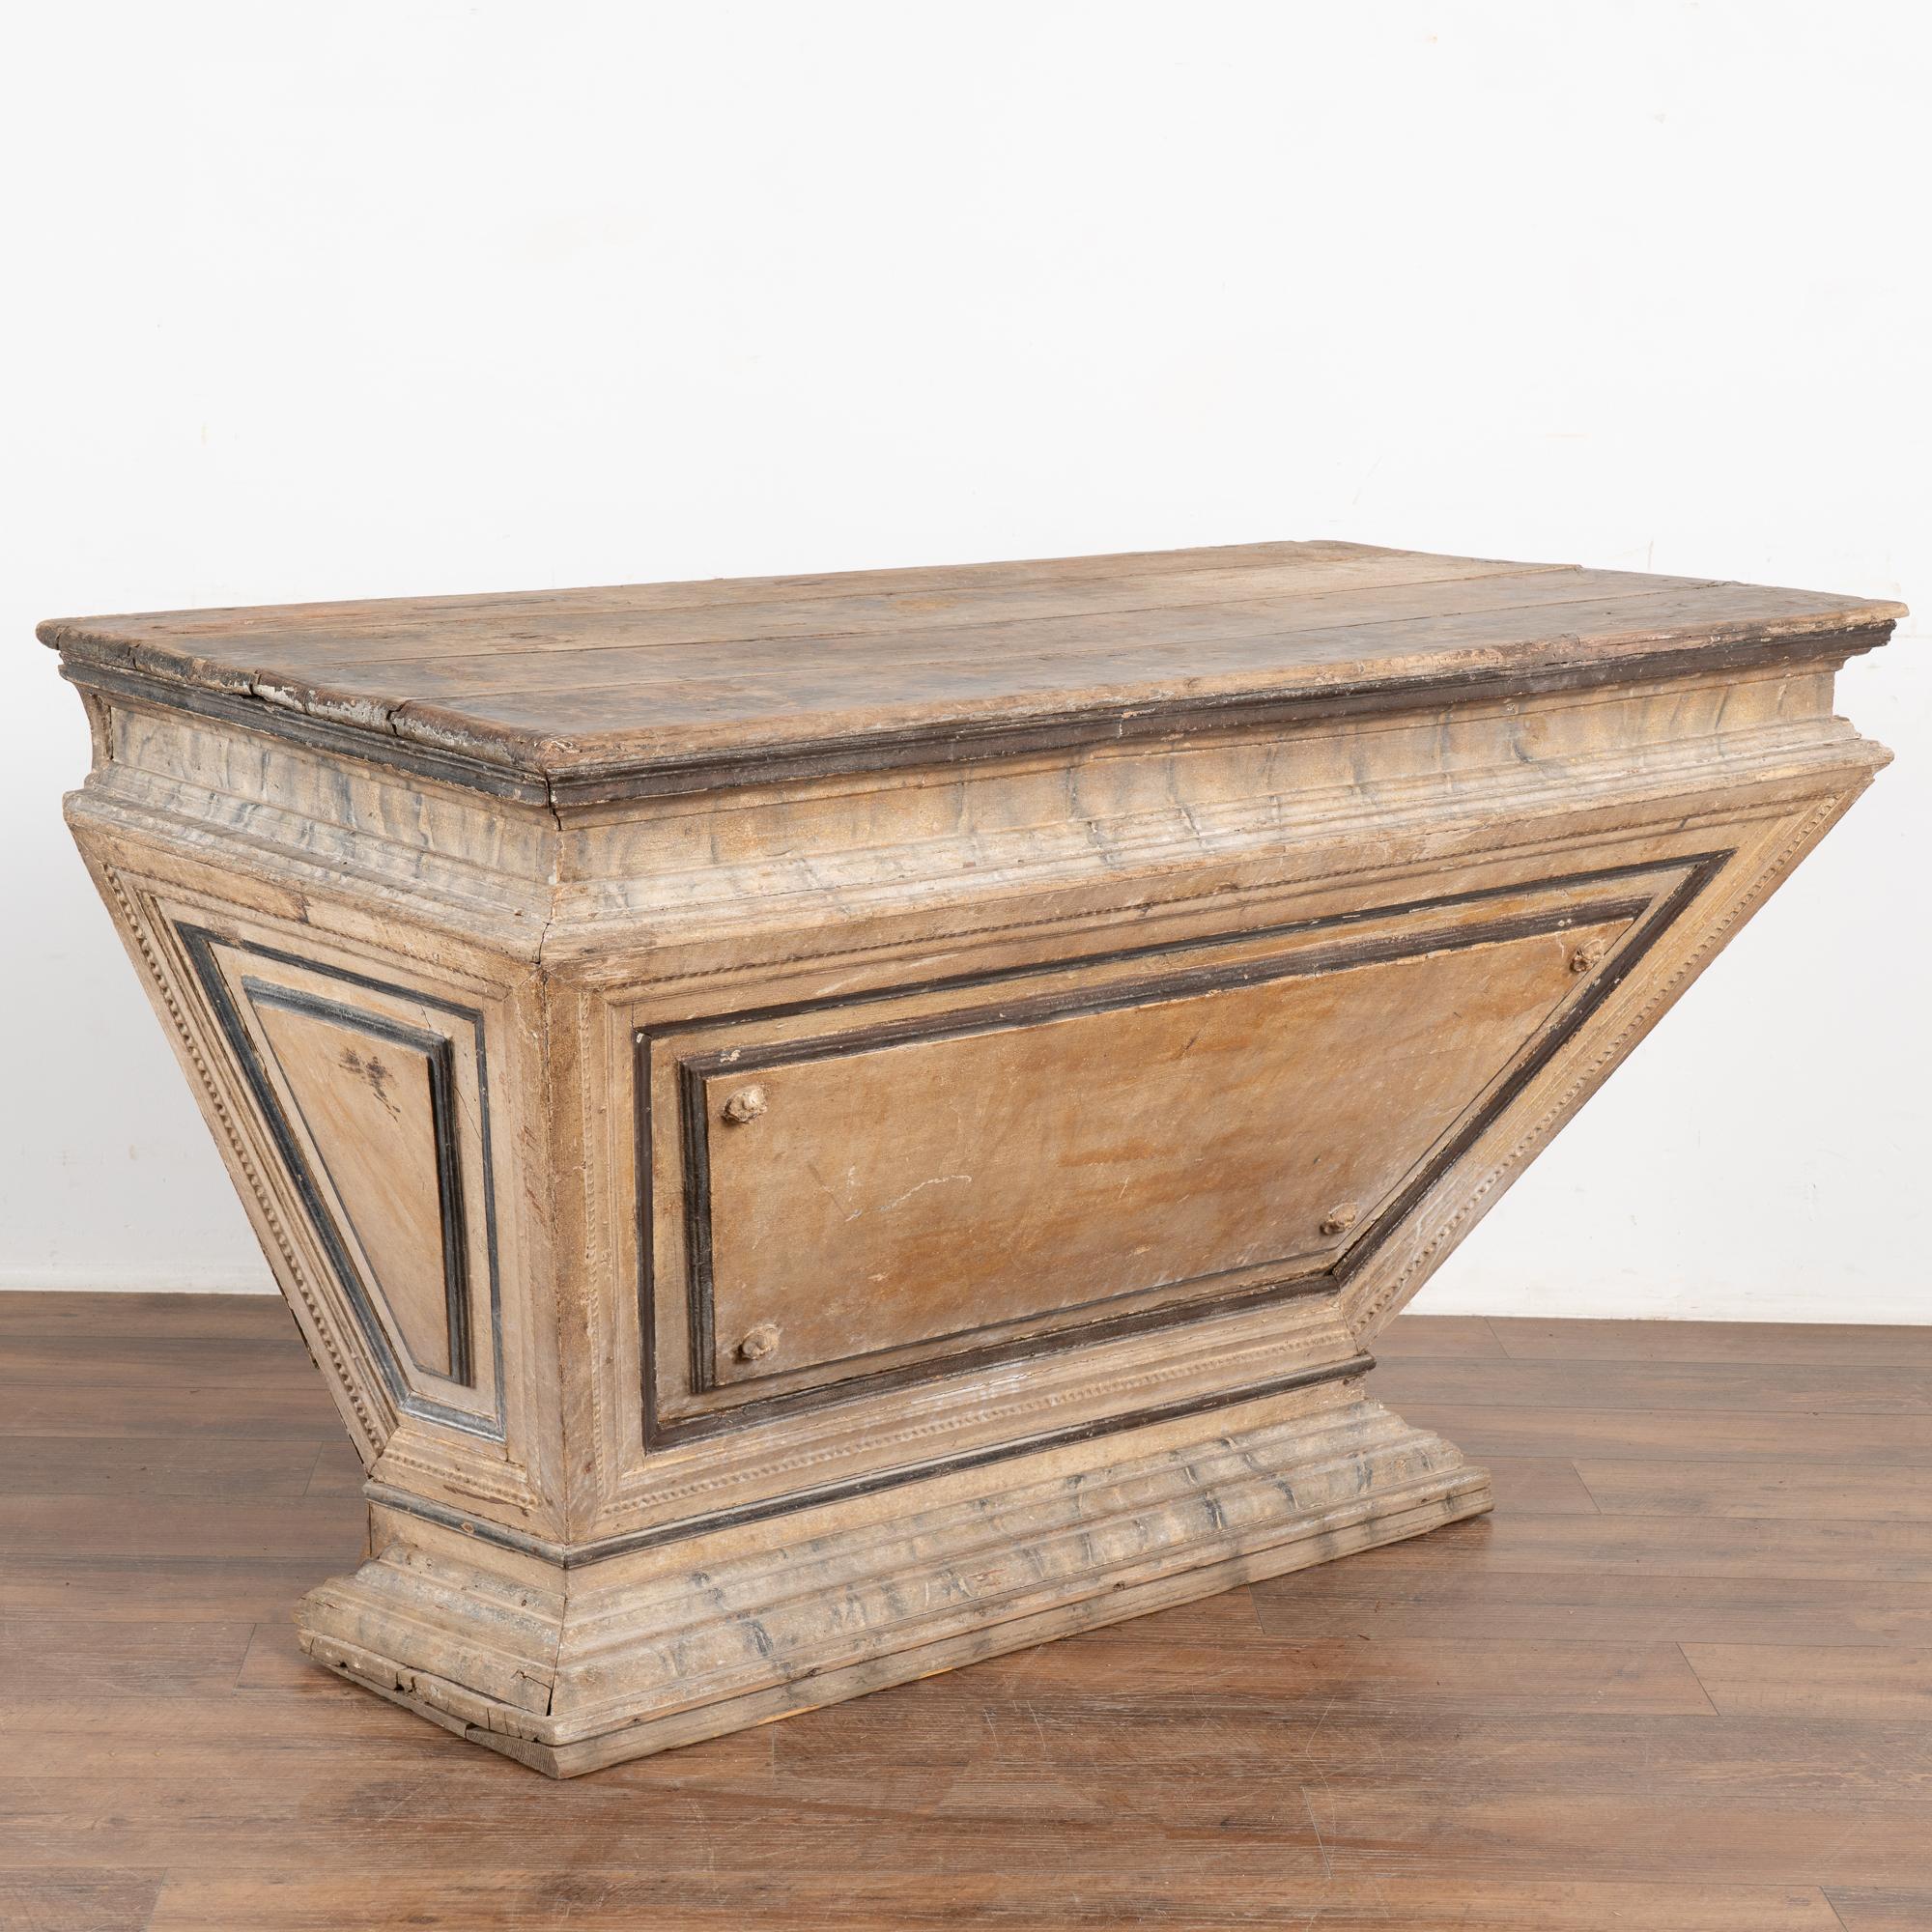 This impressive console will make a grand statement in any home. The uniquely shaped wood base was hand-painted; one can still see the faux marble design that was a traditional style element of the era.  The original paint has faded and been